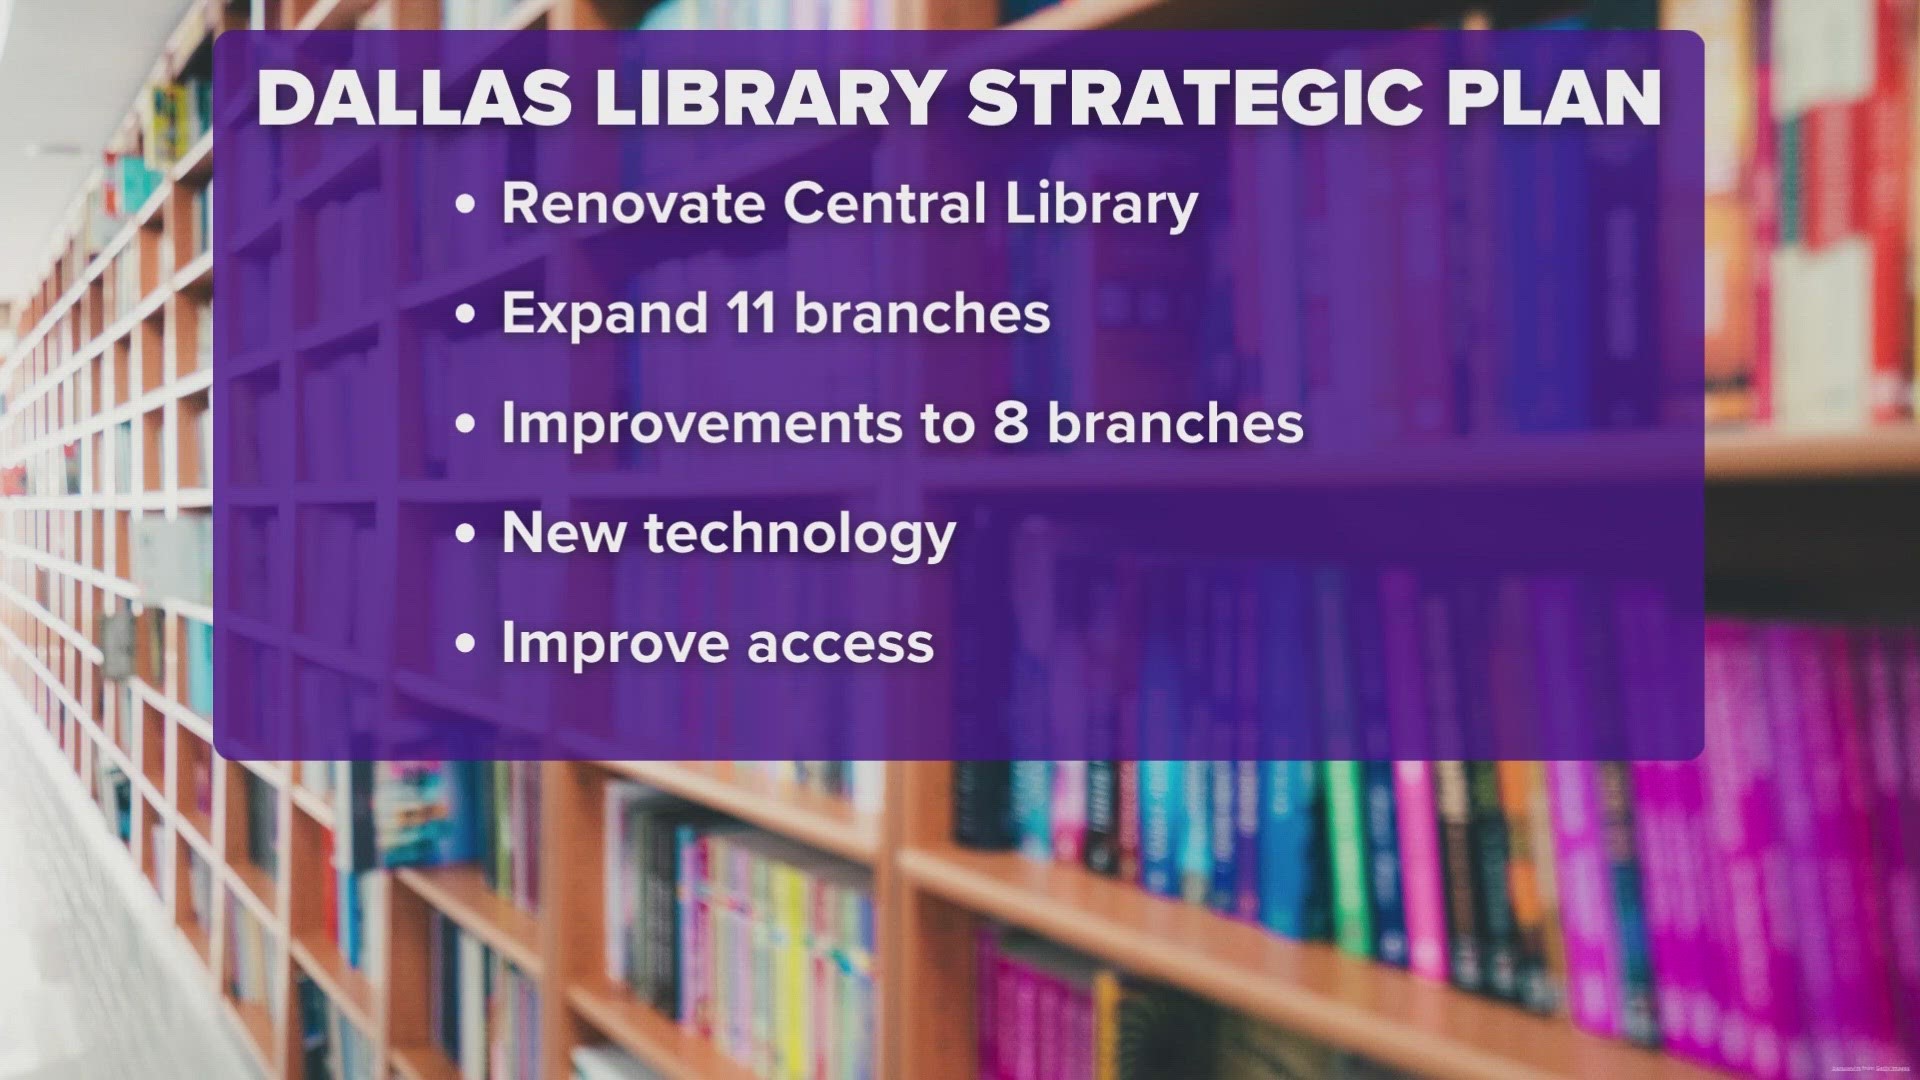 The plan includes revamping the Central Library downtown.